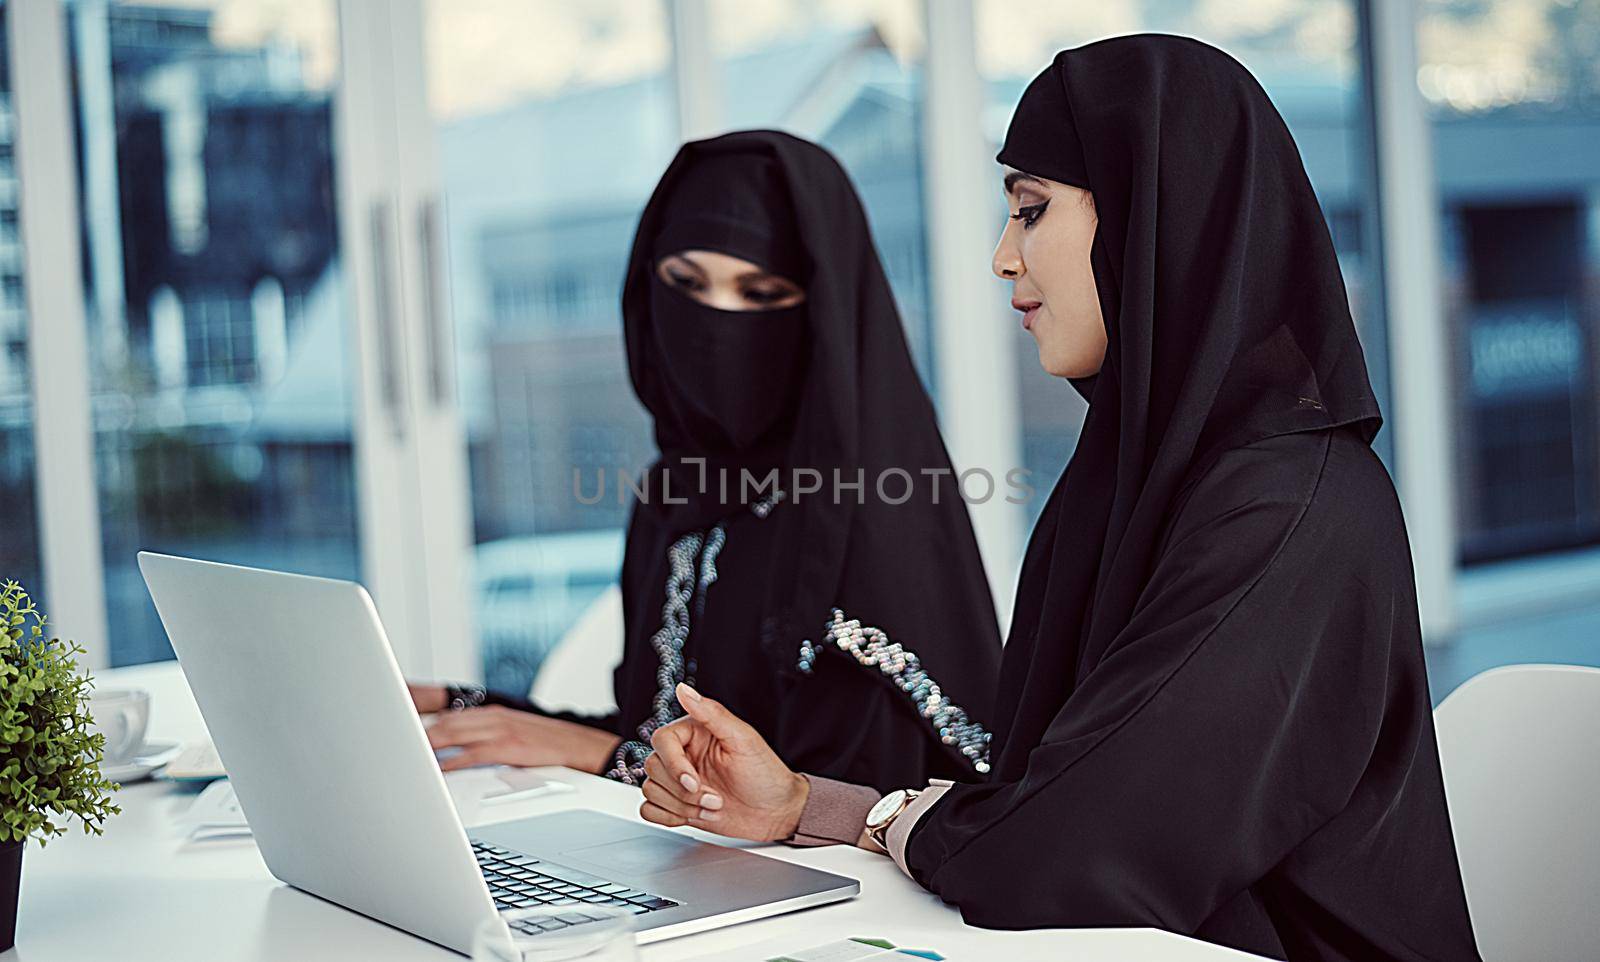 Communication and teamwork go hand in hand. two young arabic businesswomen working on a laptop in their office